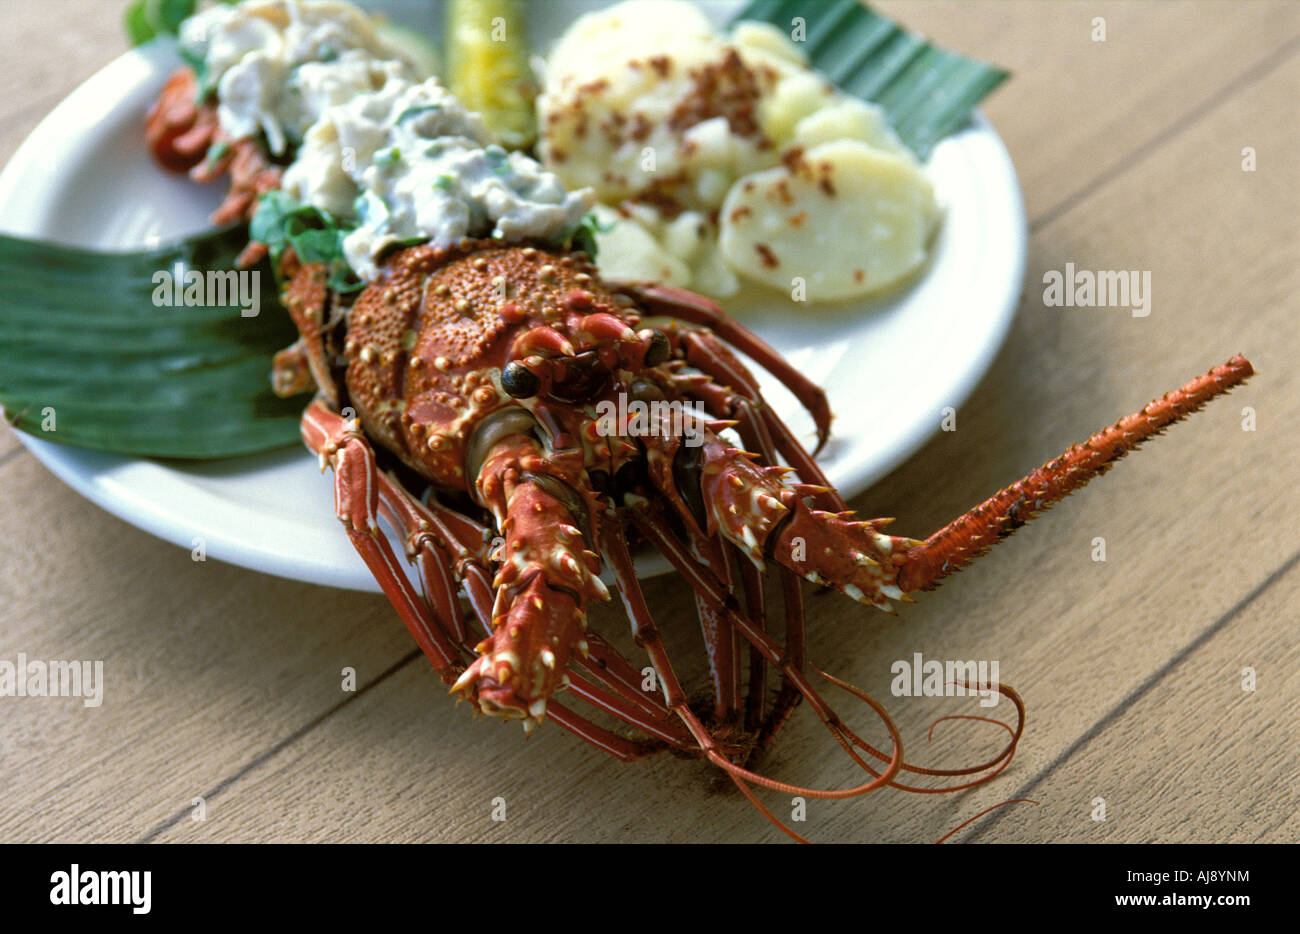 A pacific lobster Stock Photo